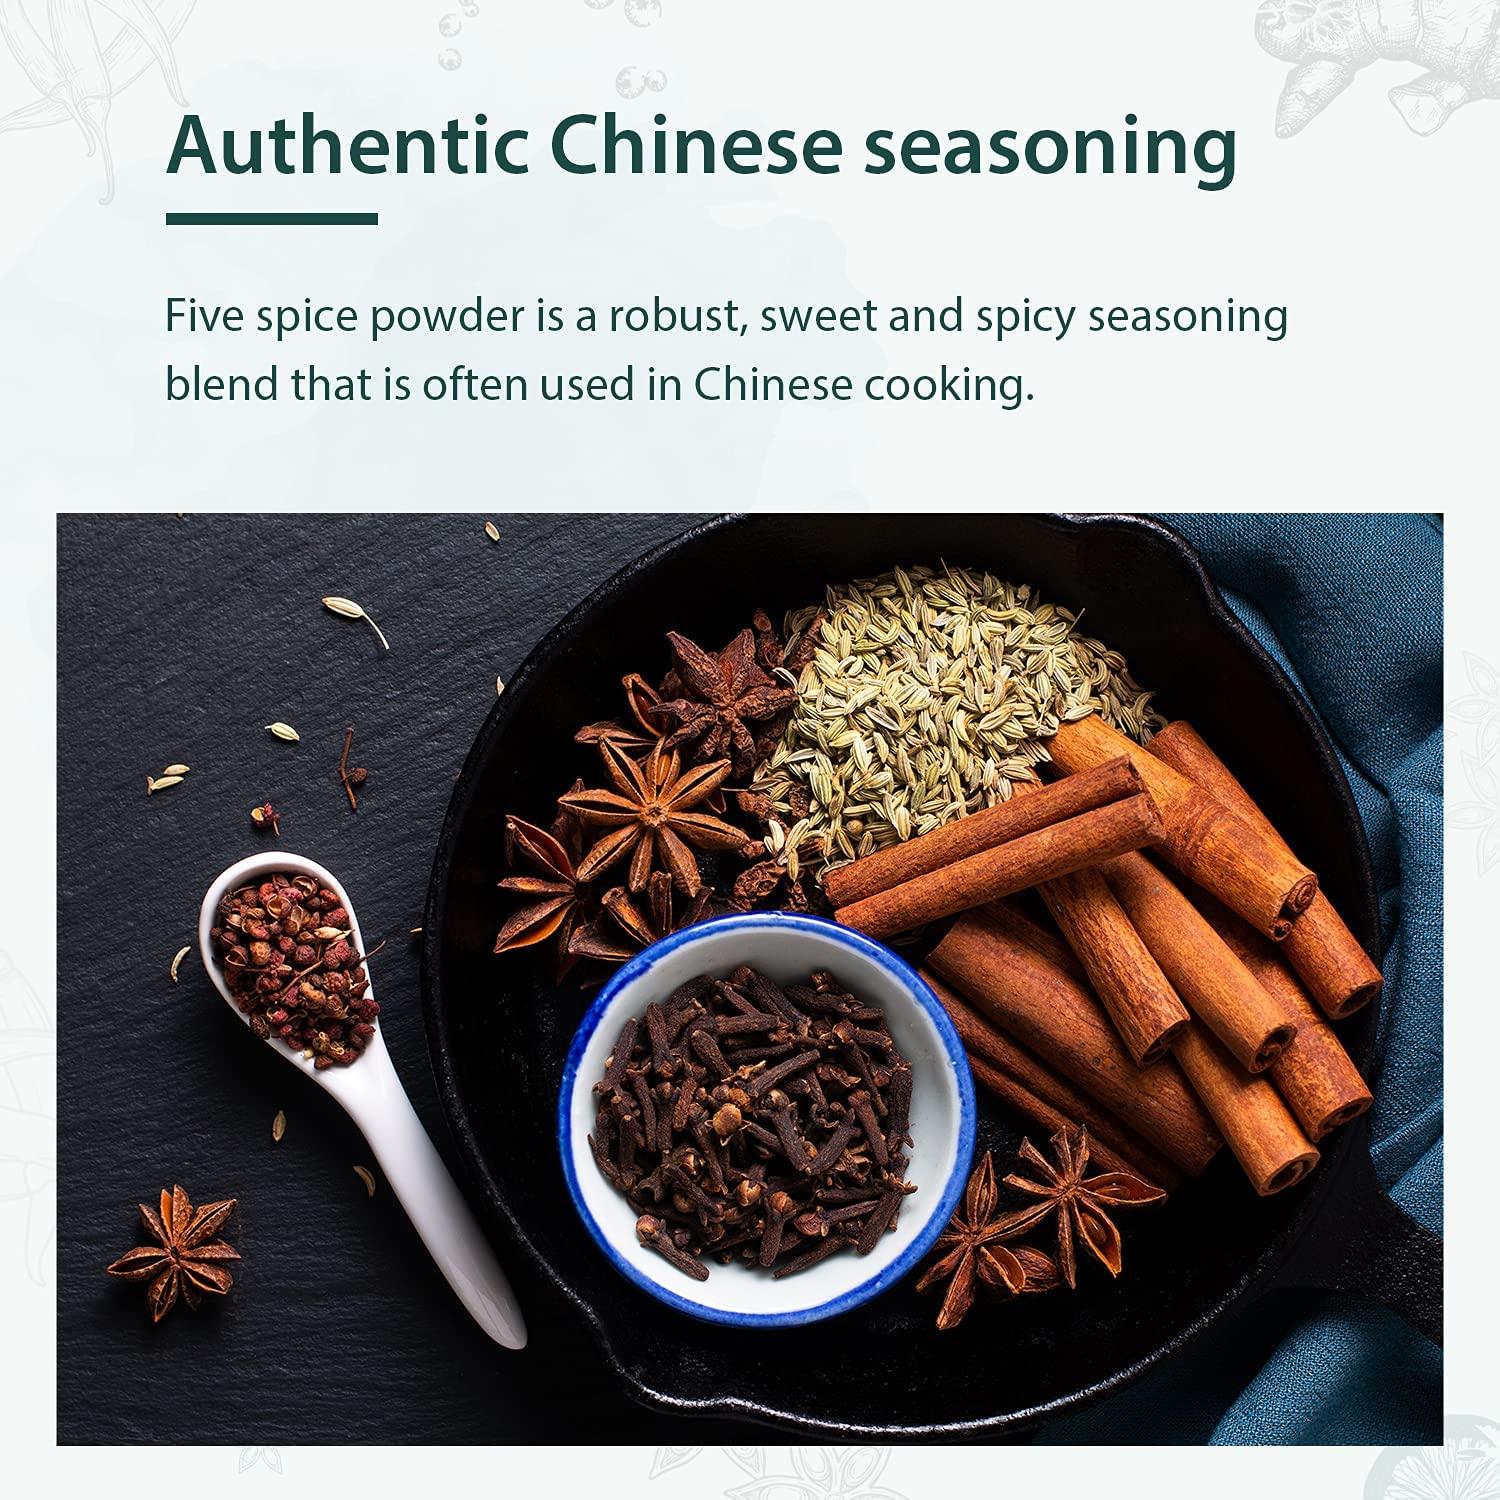 How to make authentic Chinese Five Spice